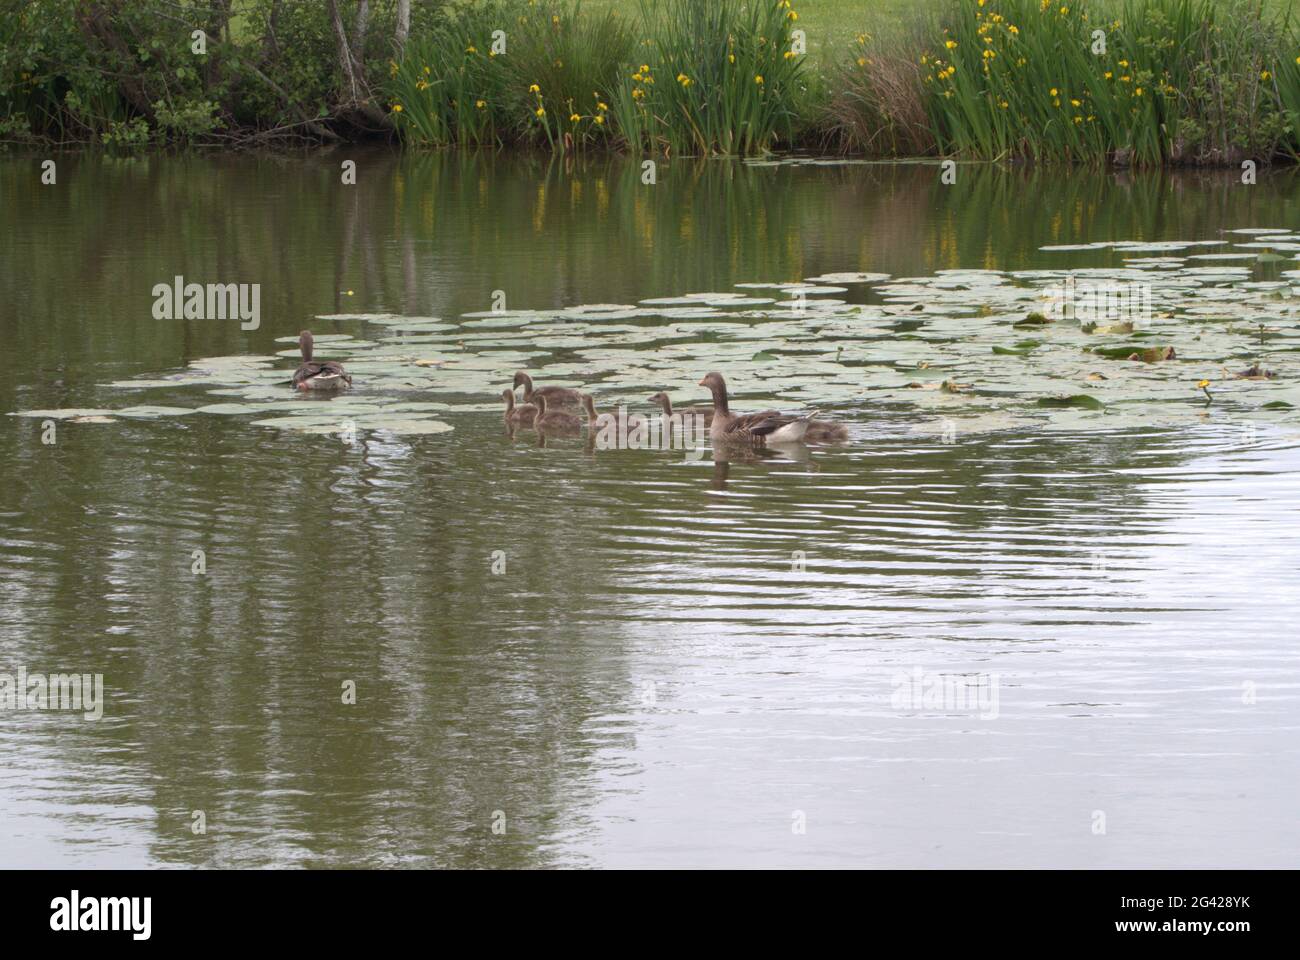 Family of Greylag geese swimming across a fishing pond Stock Photo